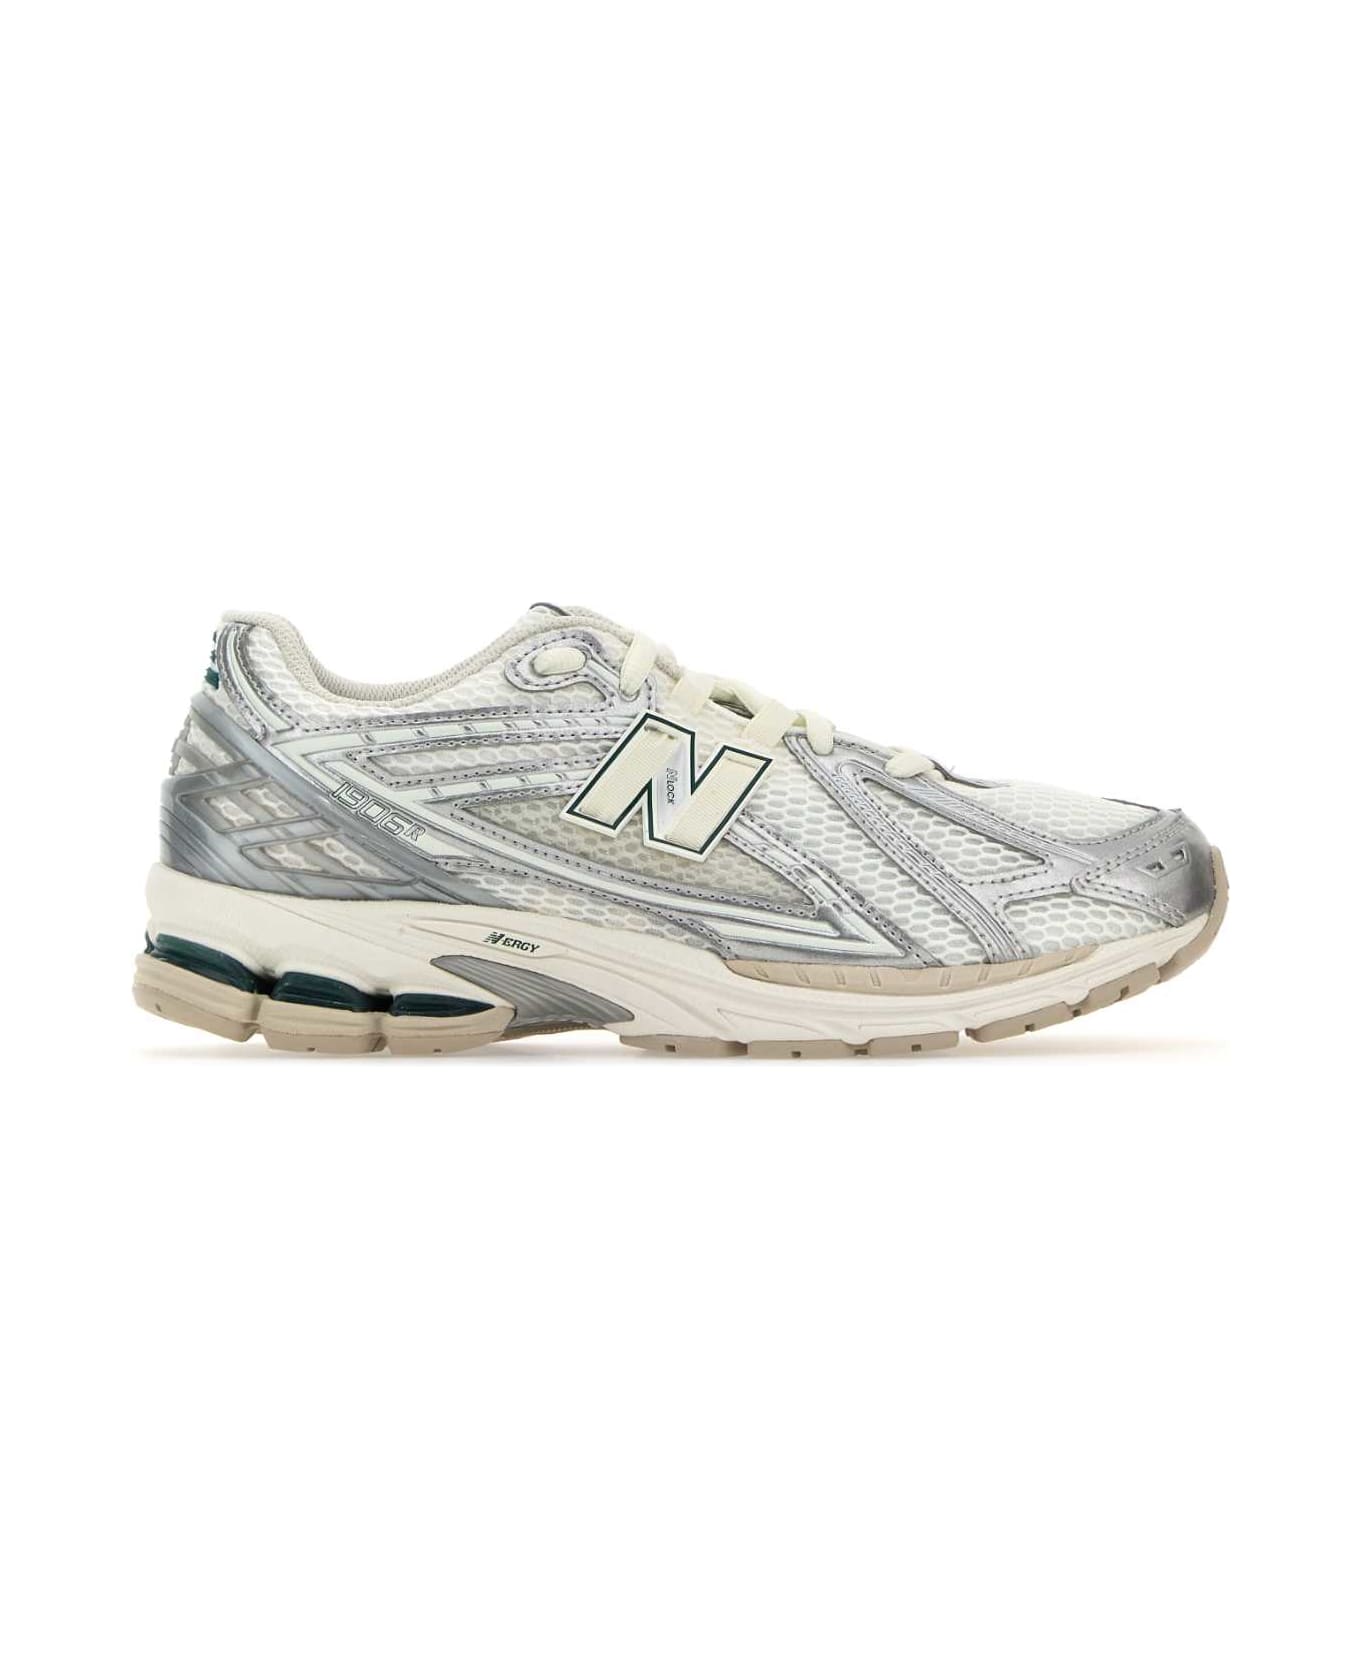 New Balance Multicolor Fabric And Mesh 1960r Sneakers - SILMETOFFWHI